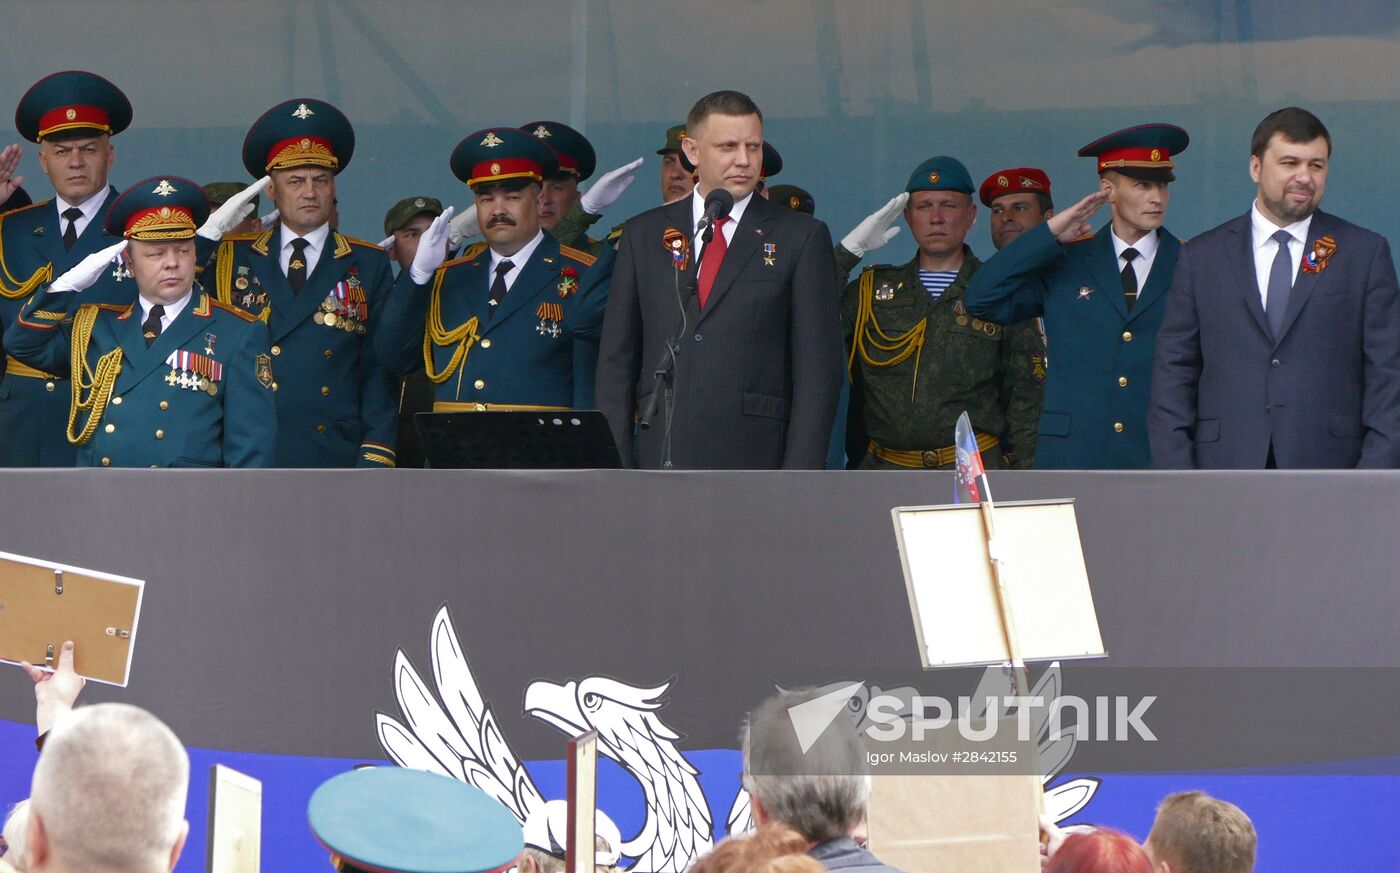 celebrations of Victory Day in DPR